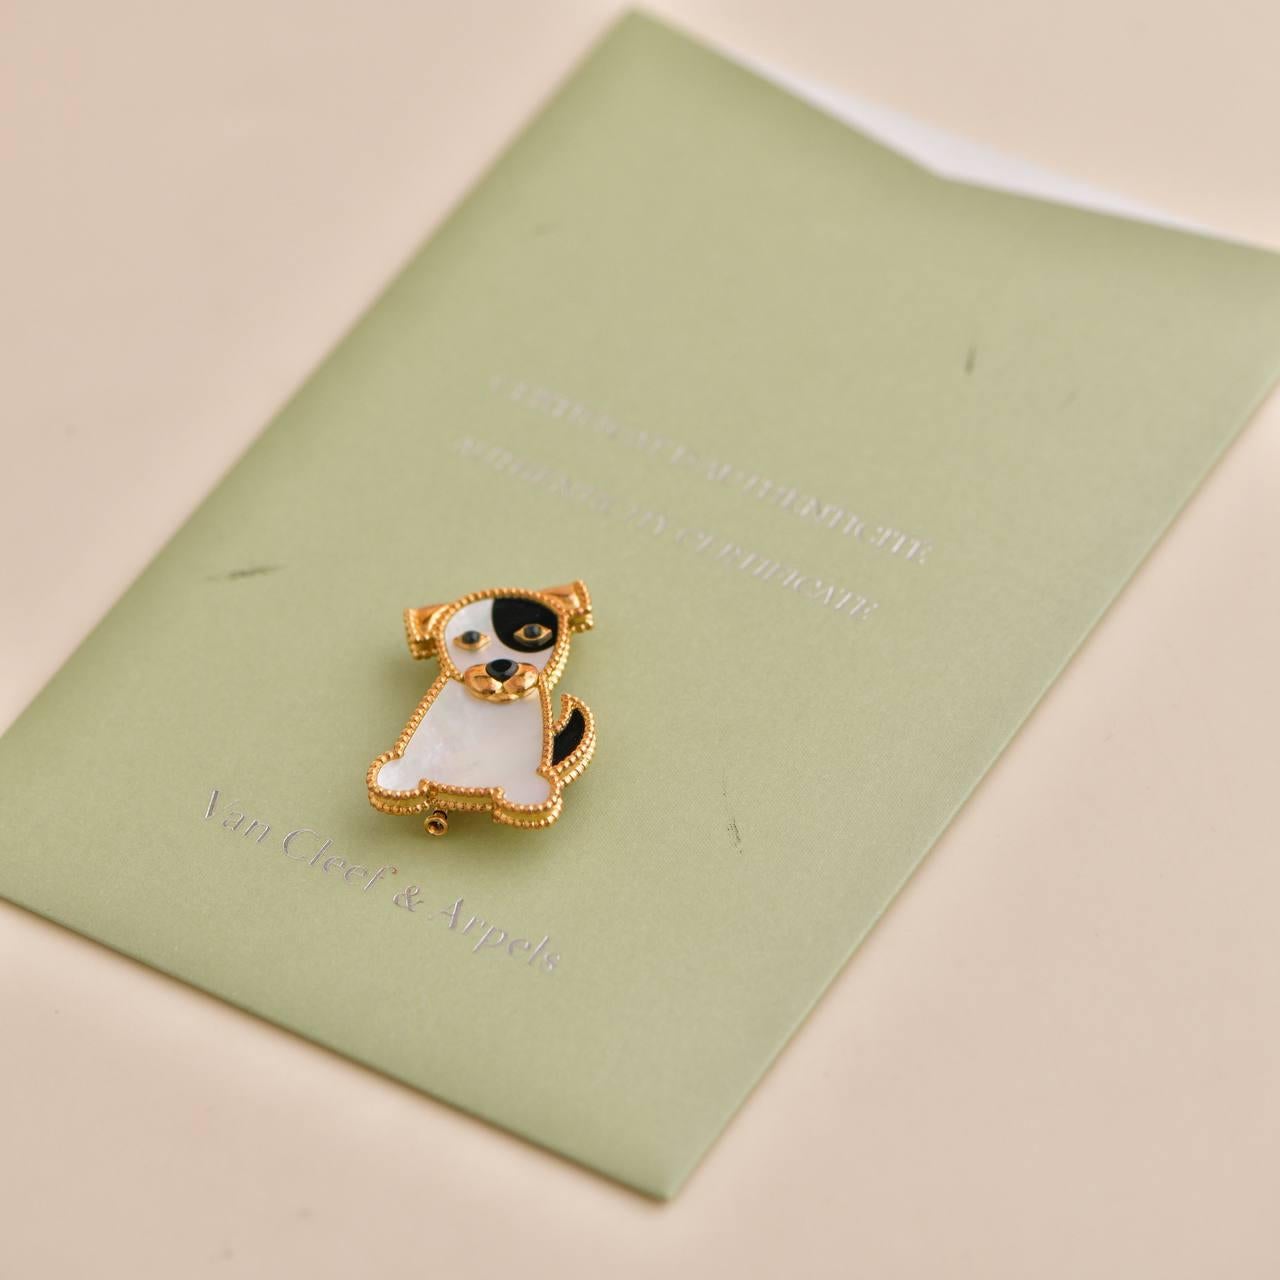 Uncut Van Cleef & Arpels 18K Yellow Gold Mother-of-Pearl Onyx Lucky Animals Dog Brooch For Sale